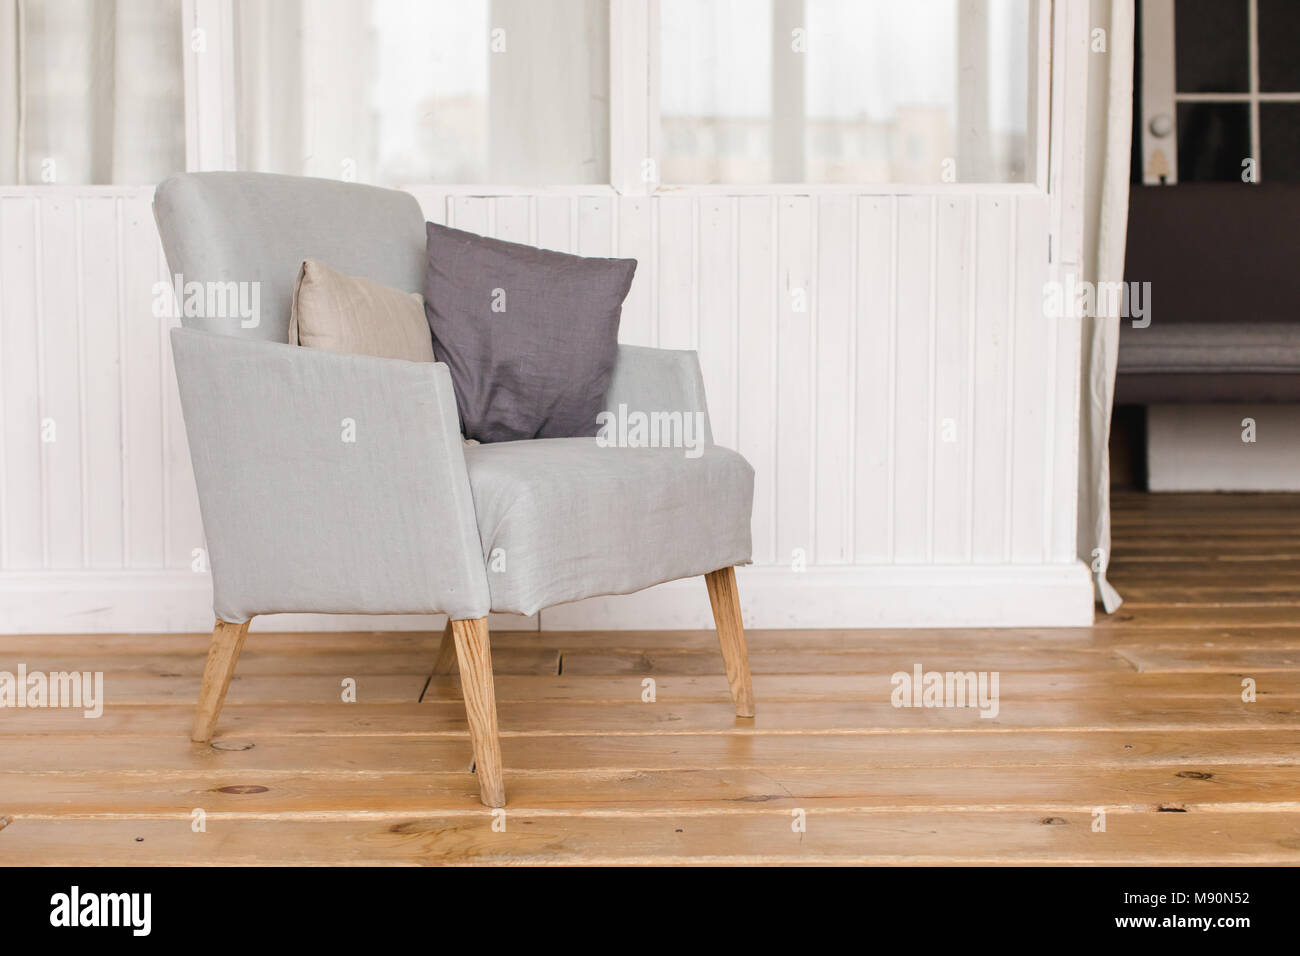 Interior shot of simple comfortable armchair with cushions on wooden floor Stock Photo